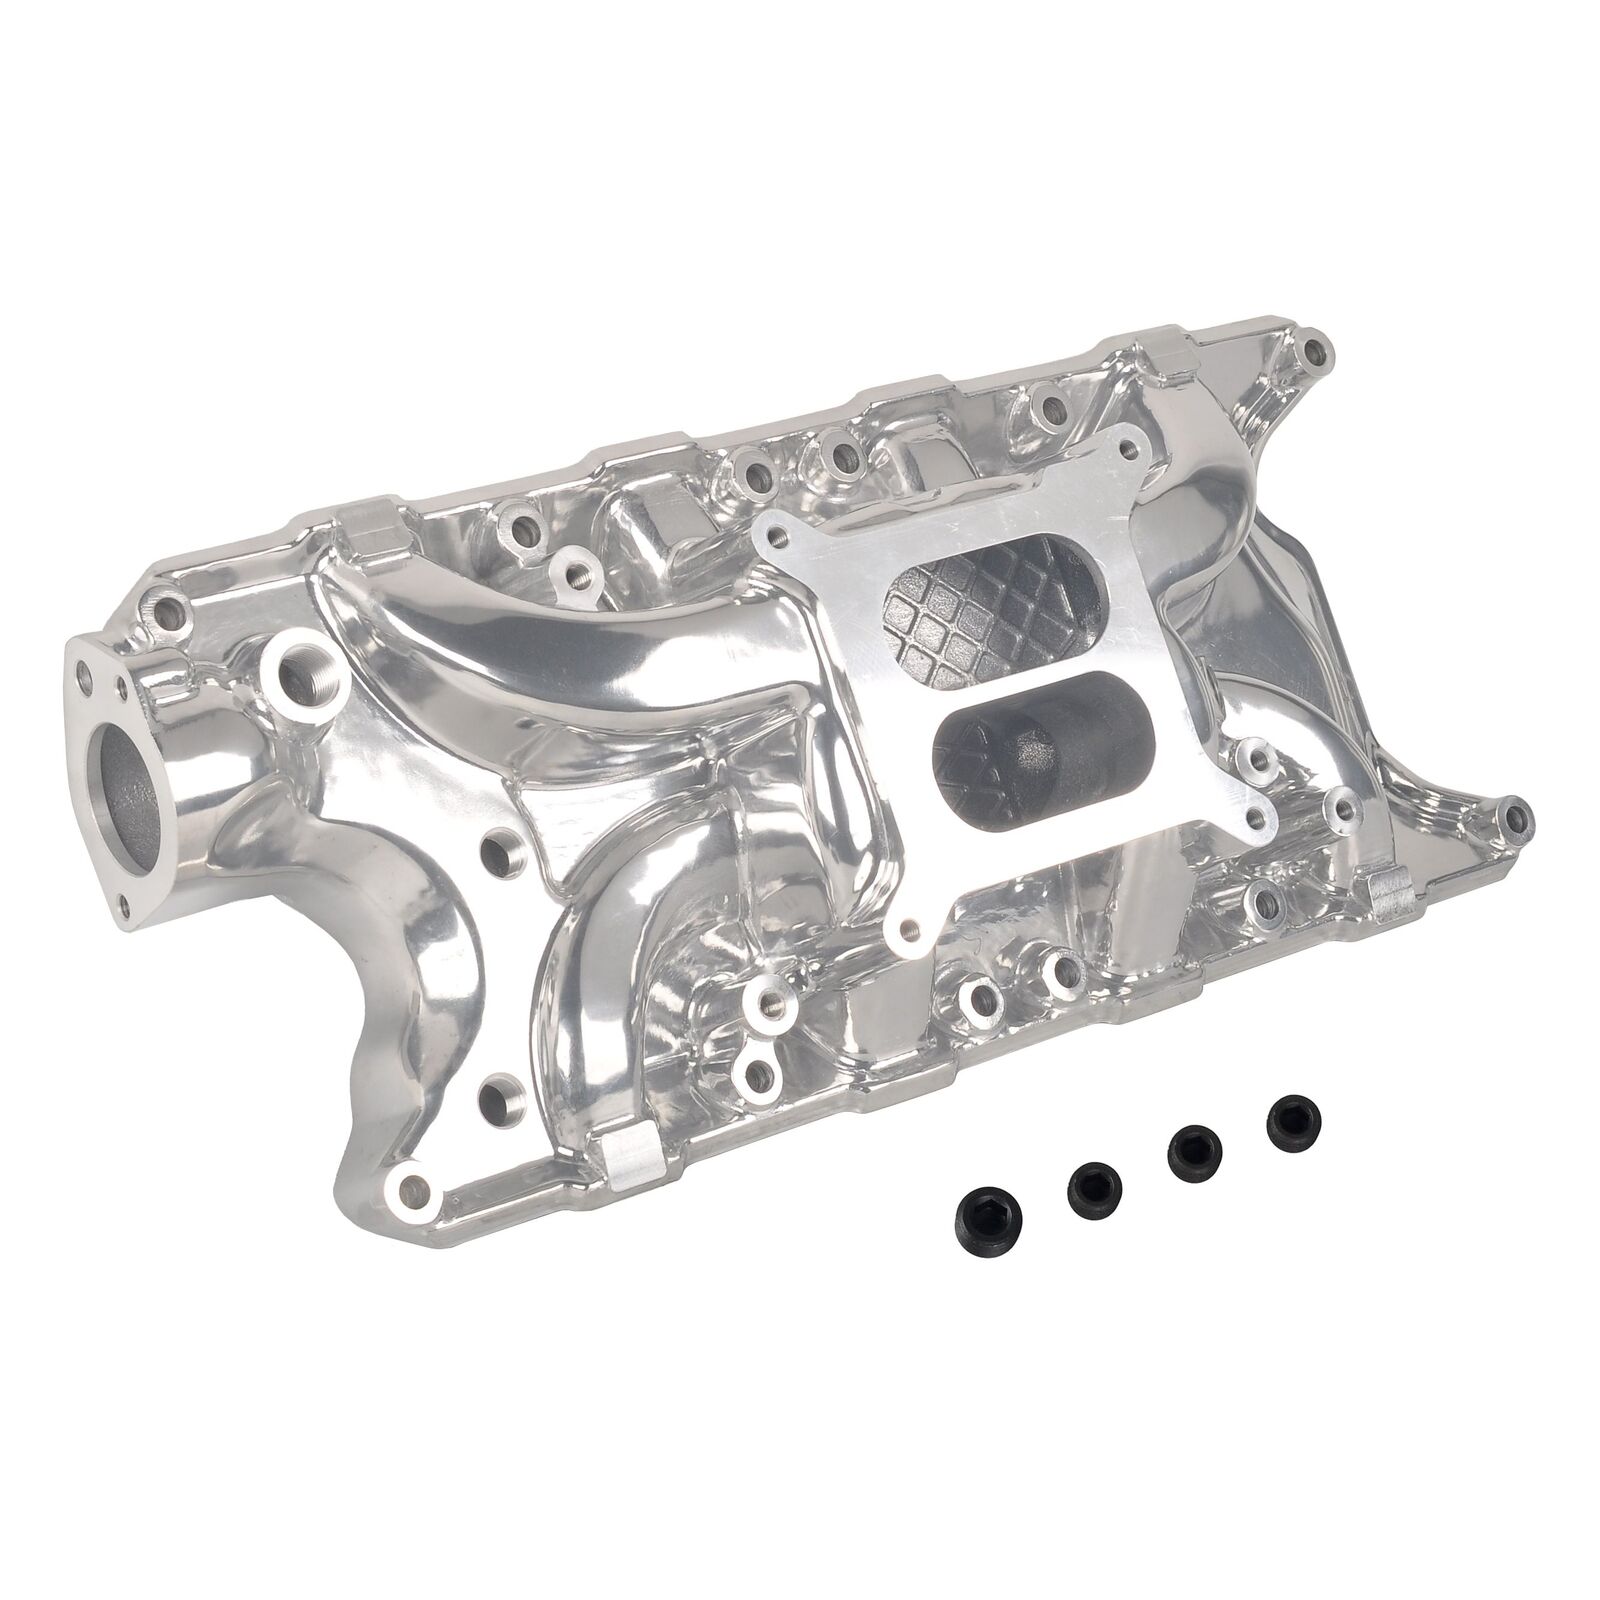 Polished Intake Manifold for Small Block Ford 289 302 F-series E-series 4.3 4.7L